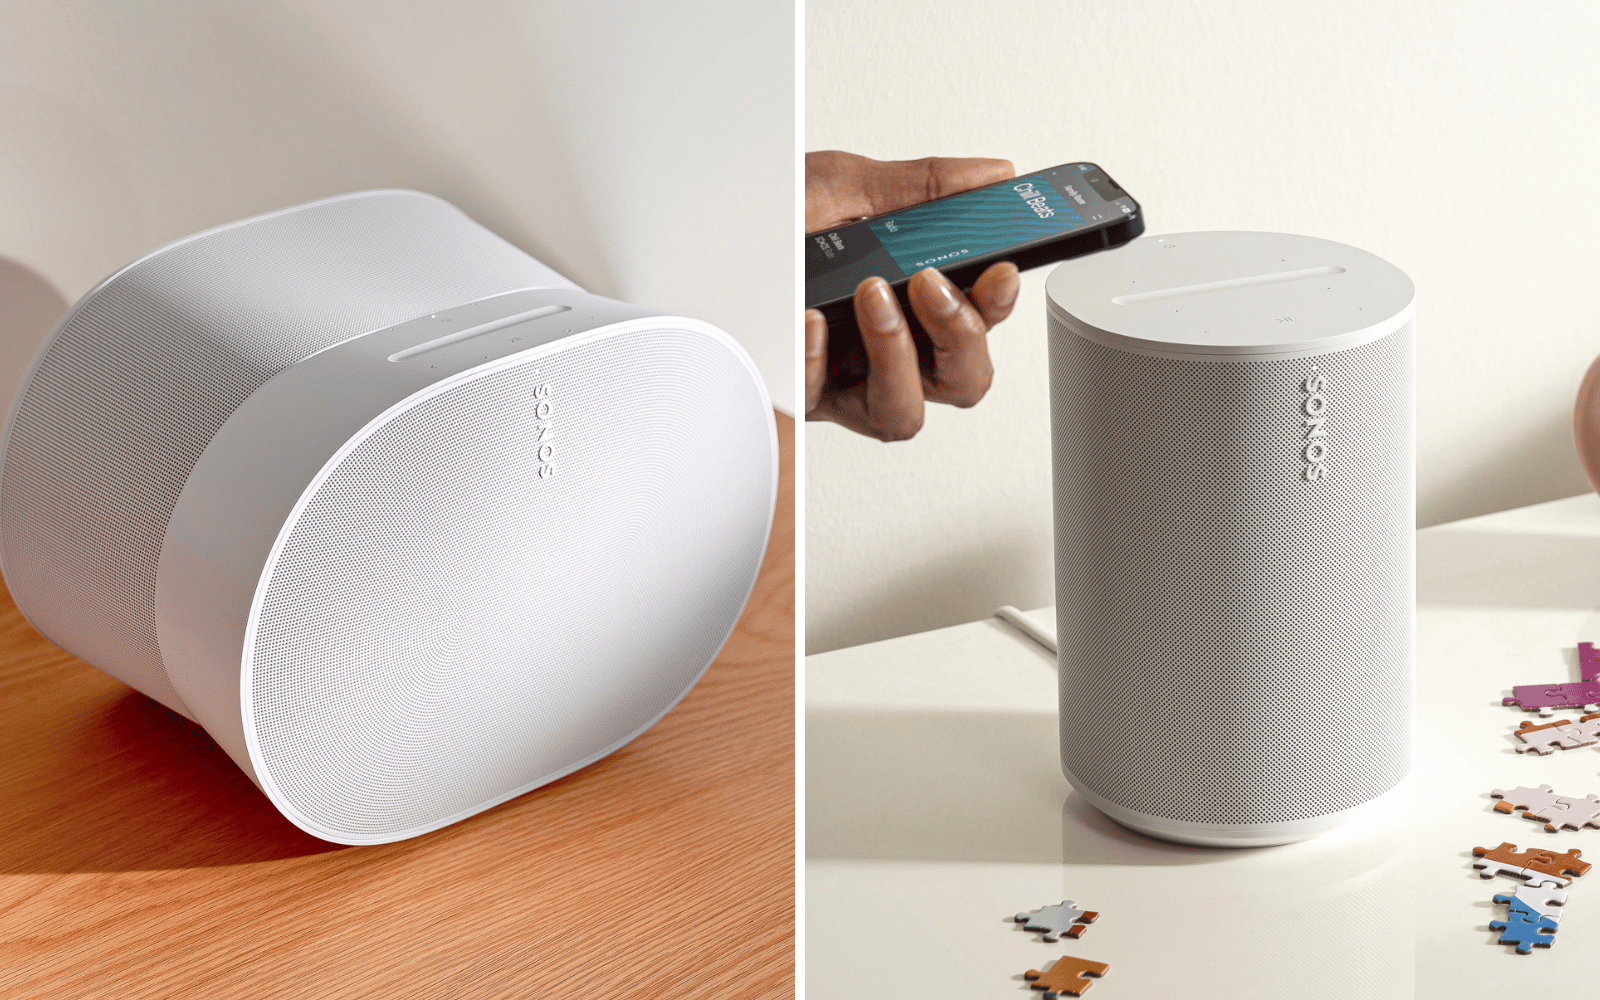 Sonos Era 100 and Era 300 Speakers: Here's What You Need to Know